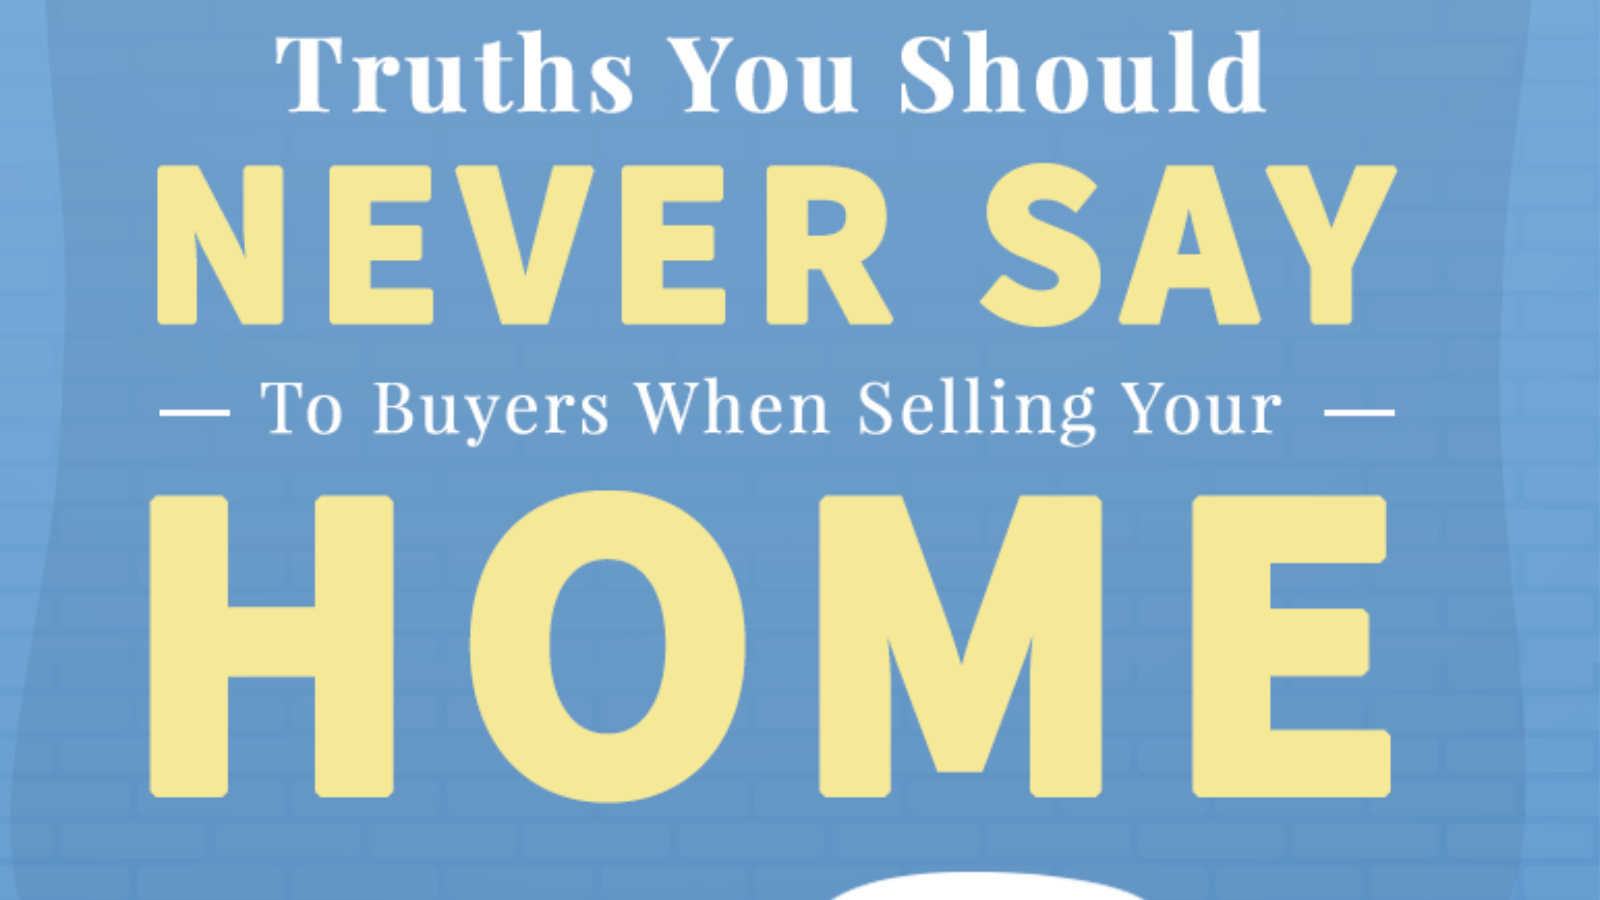 7 Truths You Should Never Say To Buyers When Selling Your Home in San Jose